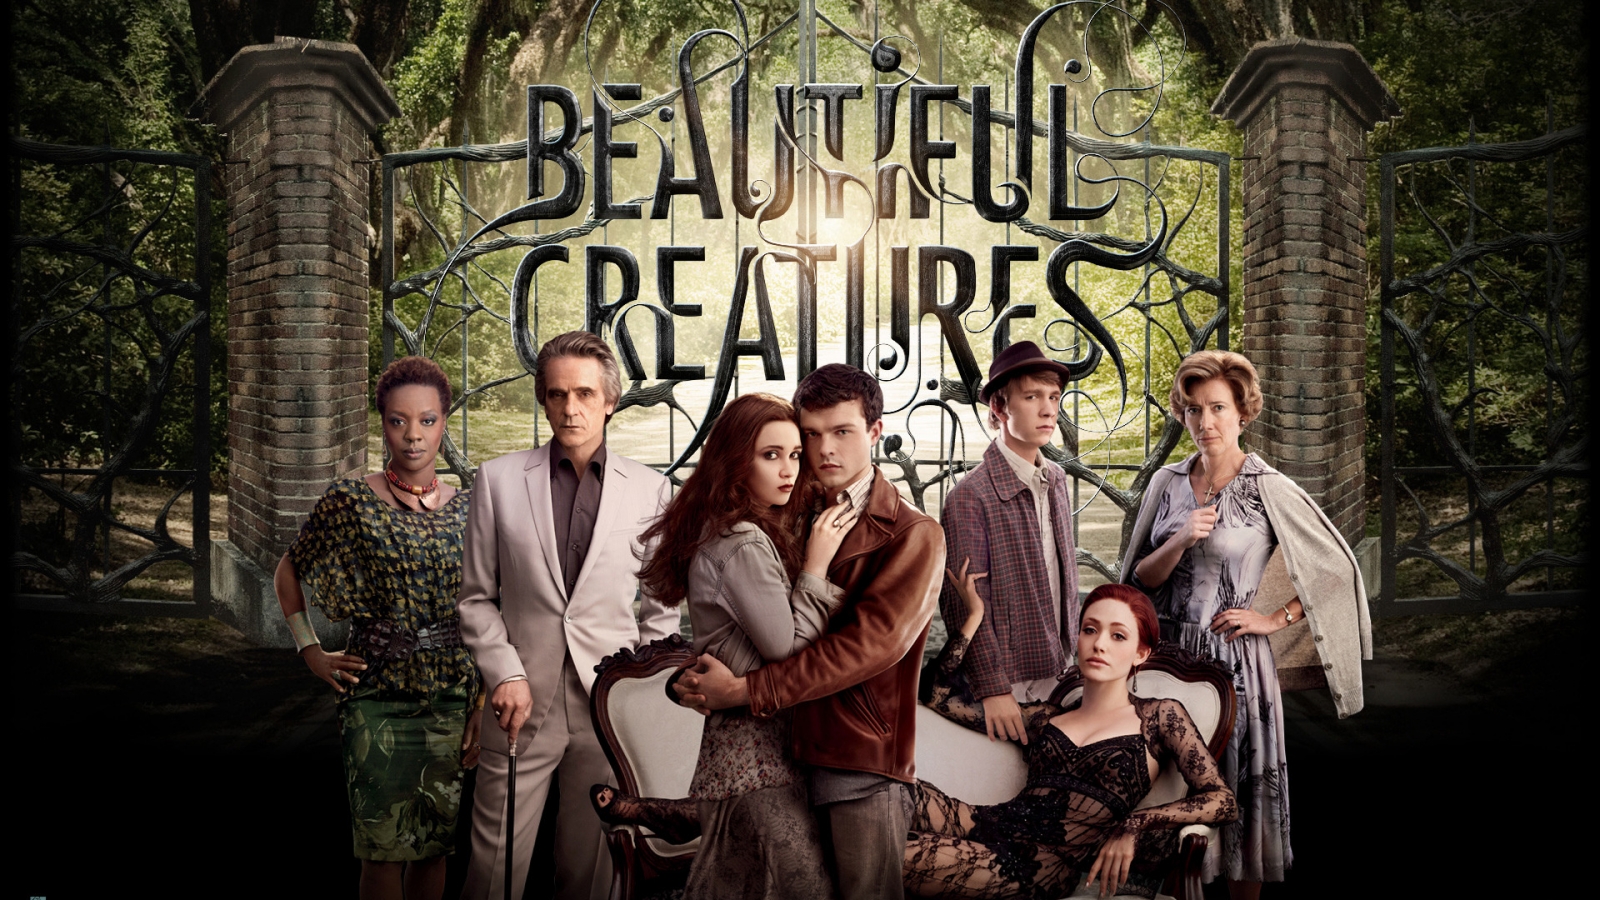 Beautiful Creatures Cast for 1600 x 900 HDTV resolution